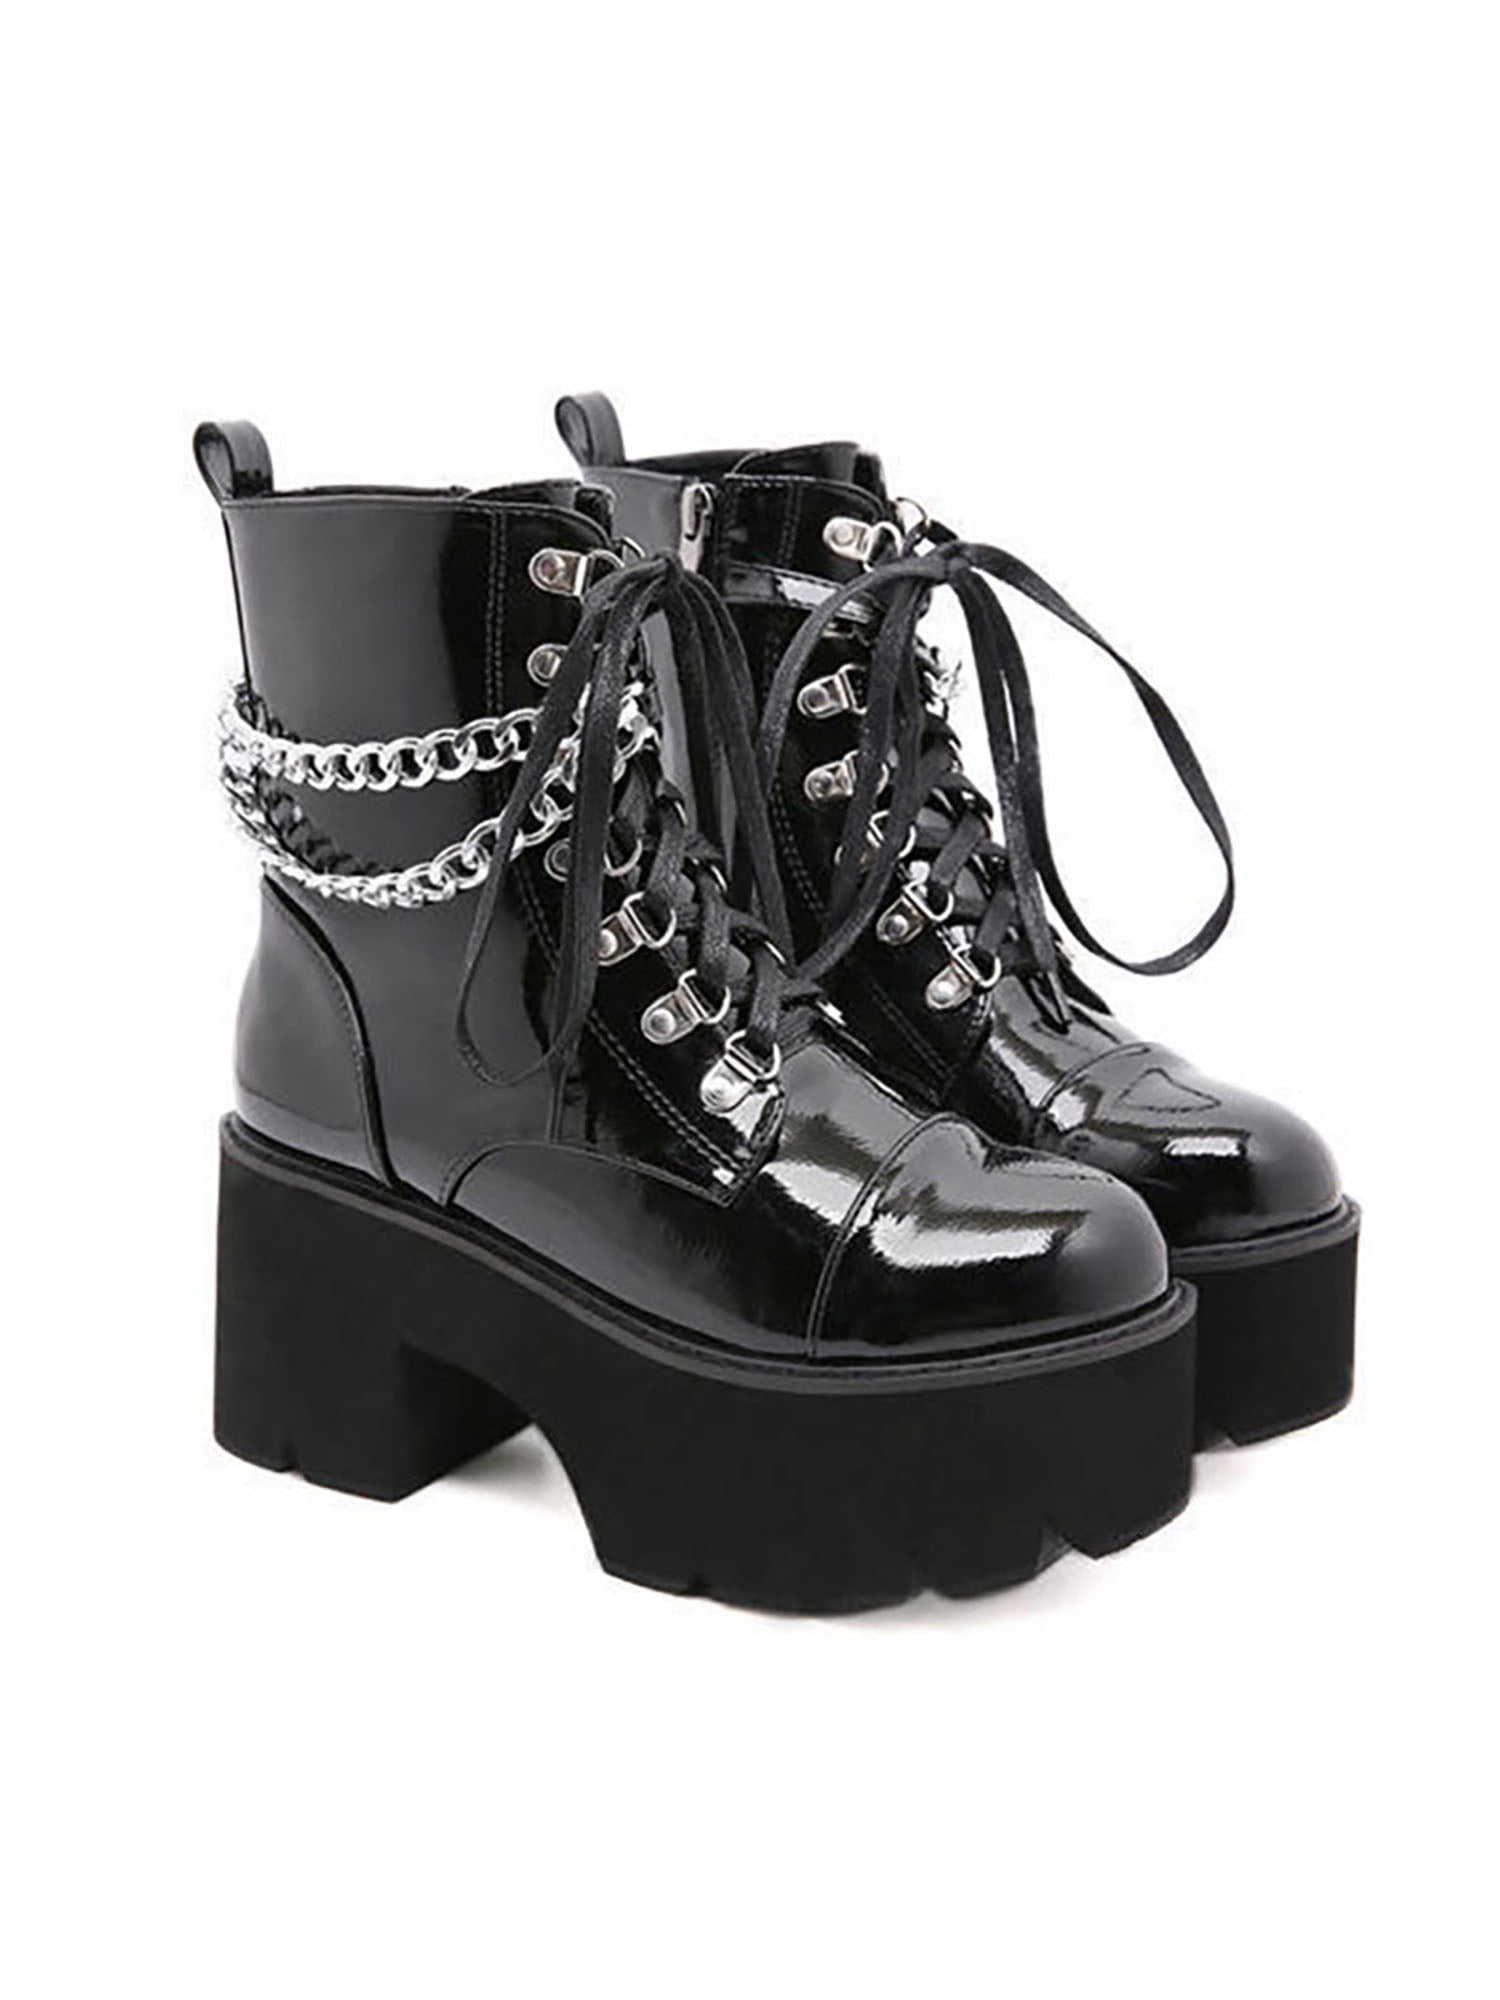 Womens Ladies High Platform Trainers Sneakers Retro Boots Chunky Rock Punk Goth 